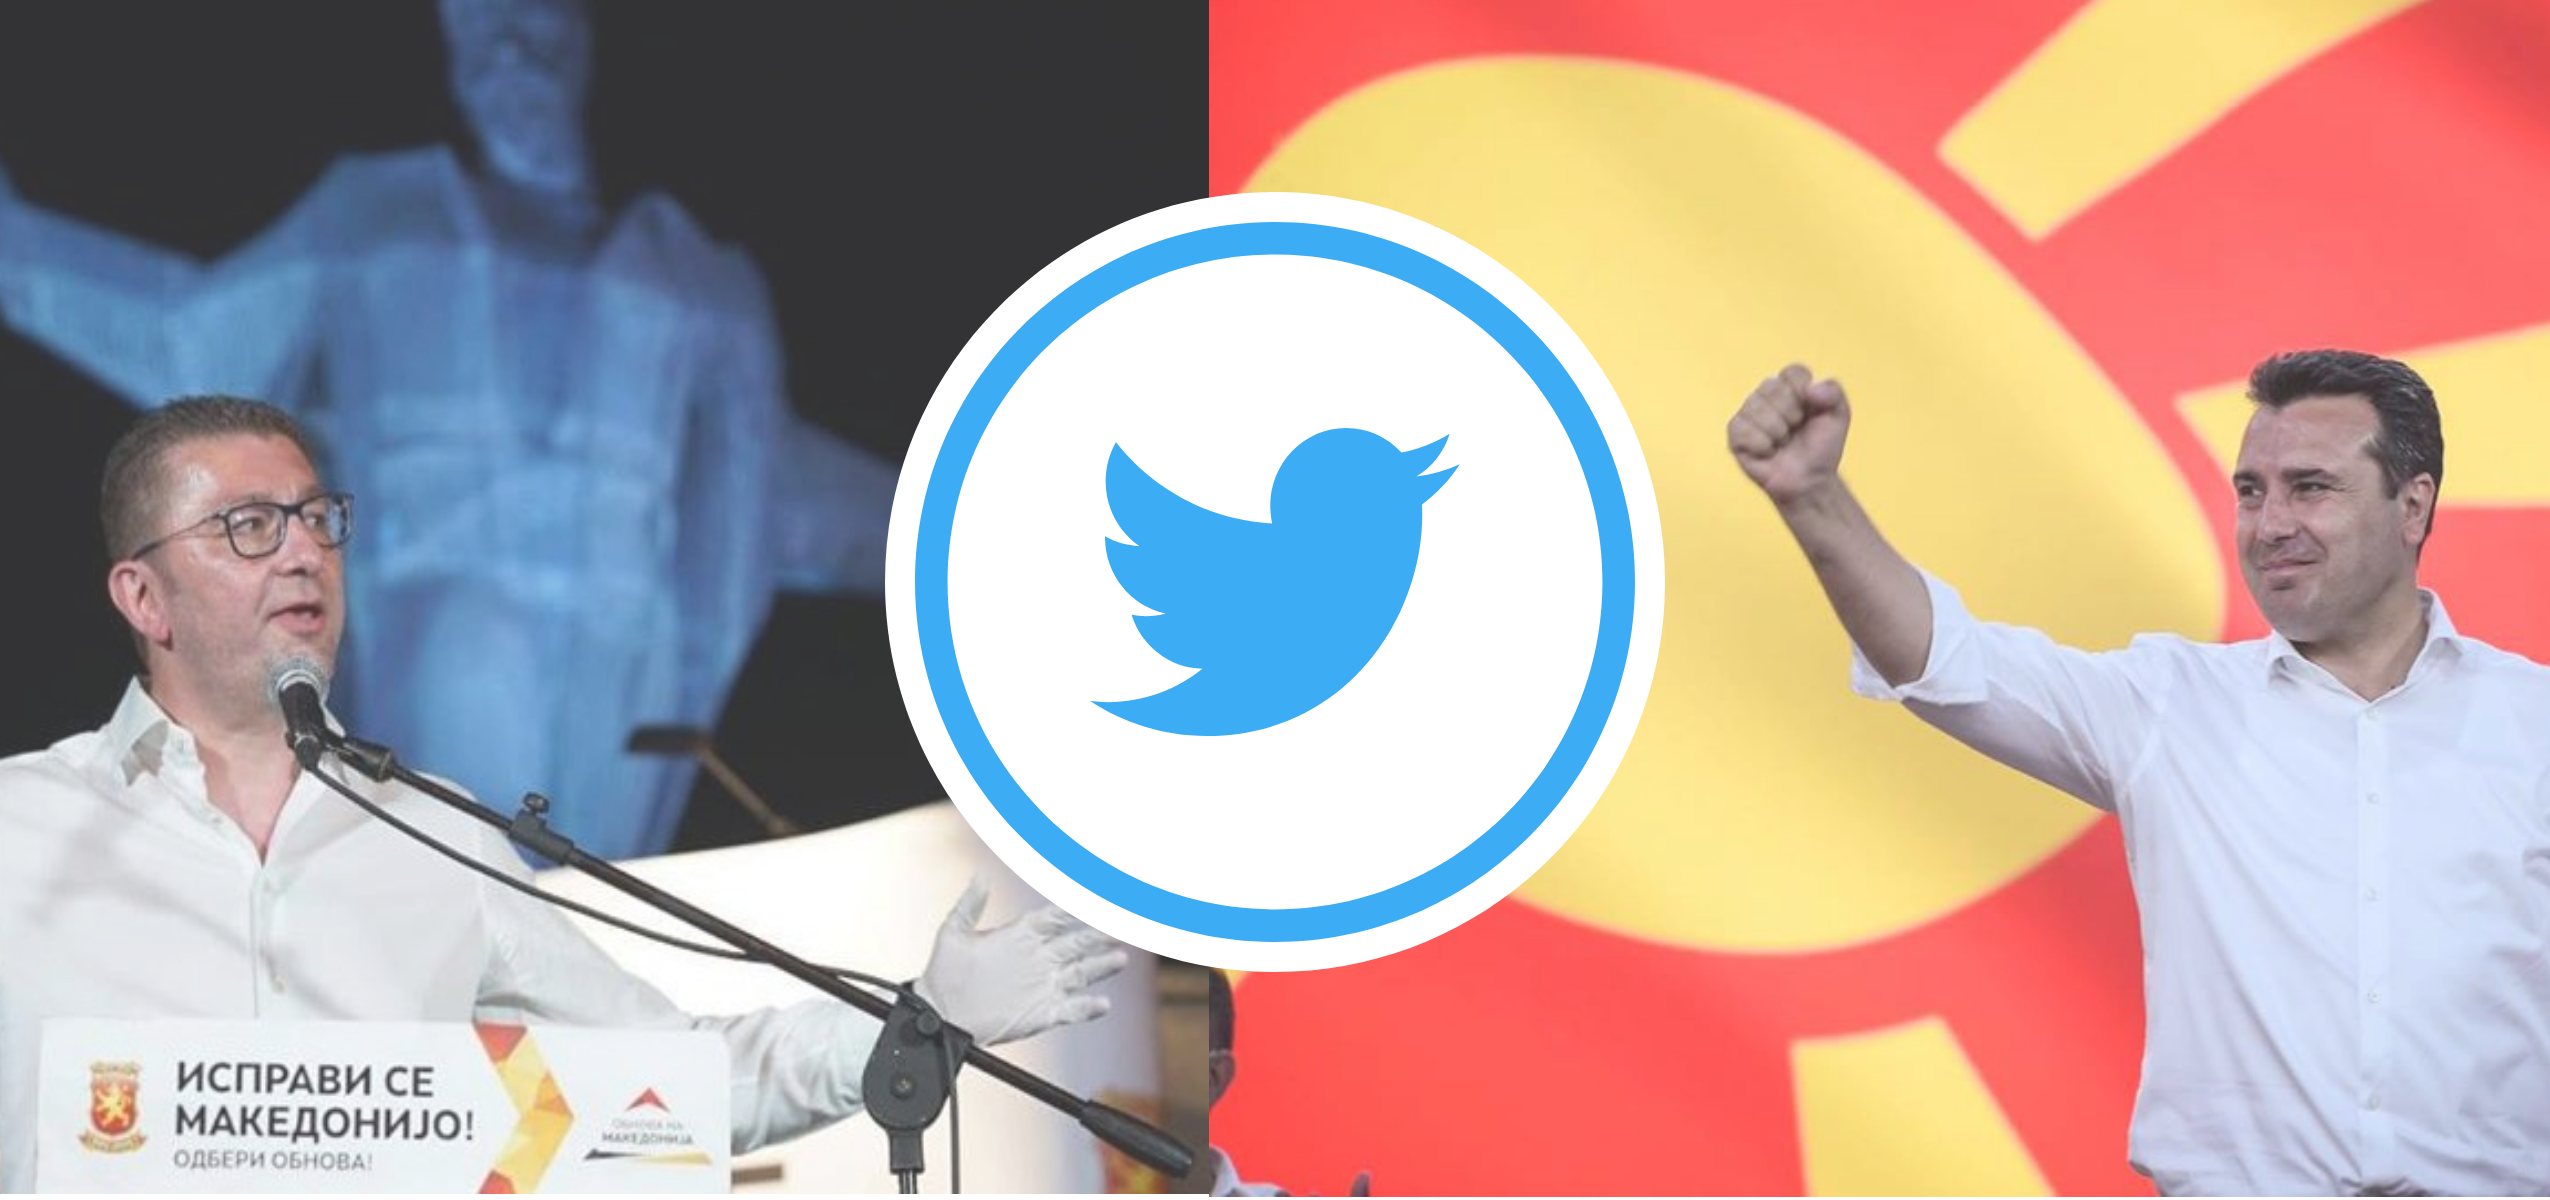 North Macedonia’s Ruling Party Won Twitter War in Election